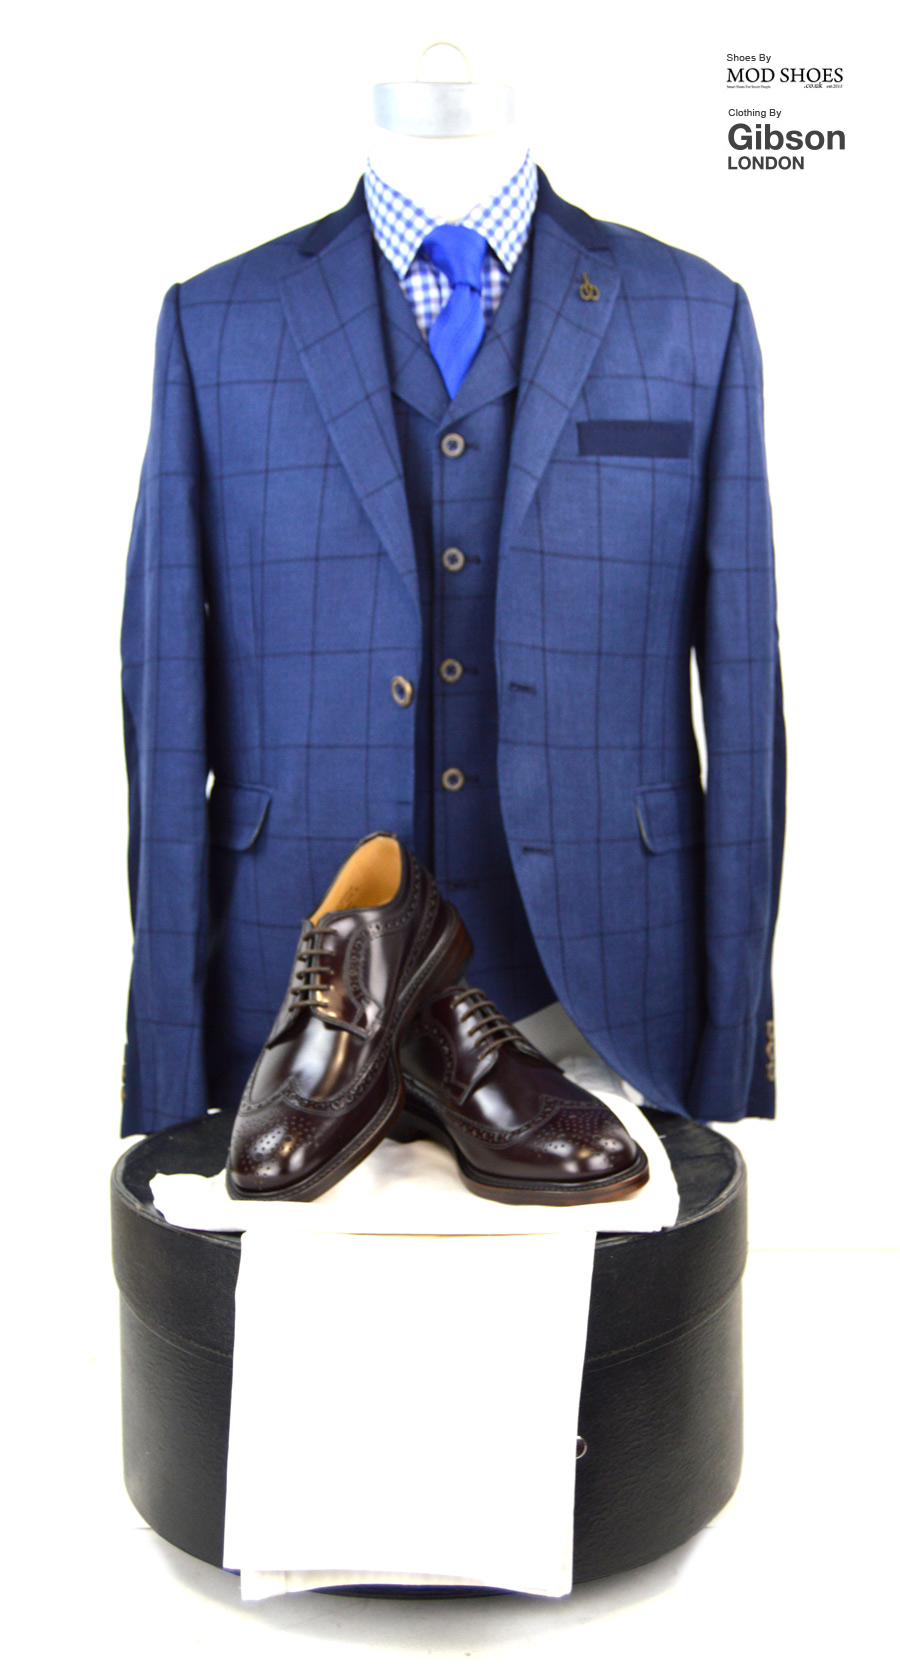 modshoes-loake-royals-with-gibson-blue-suit